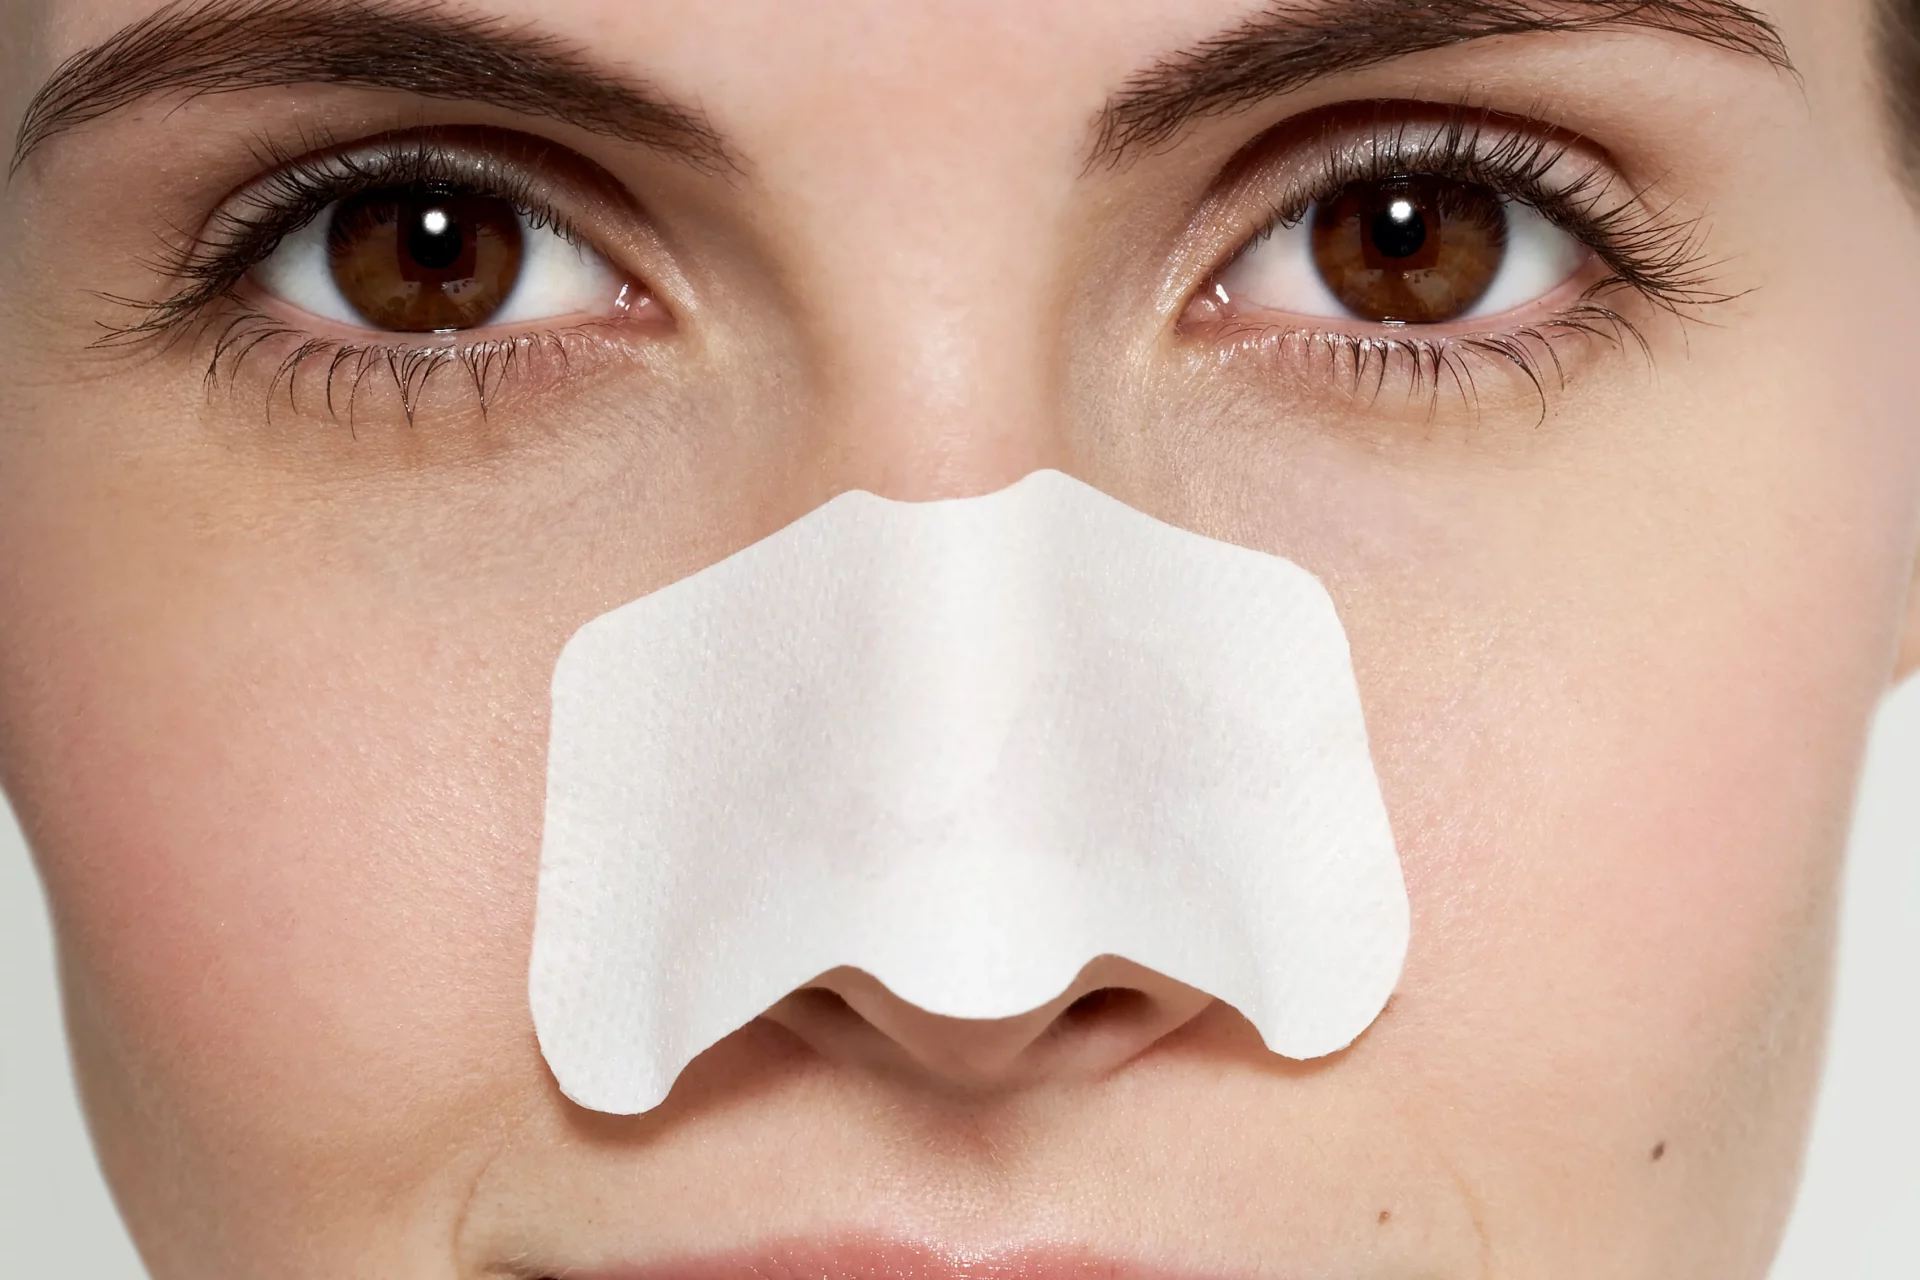 Tips for cleaning and unclogging nose pores